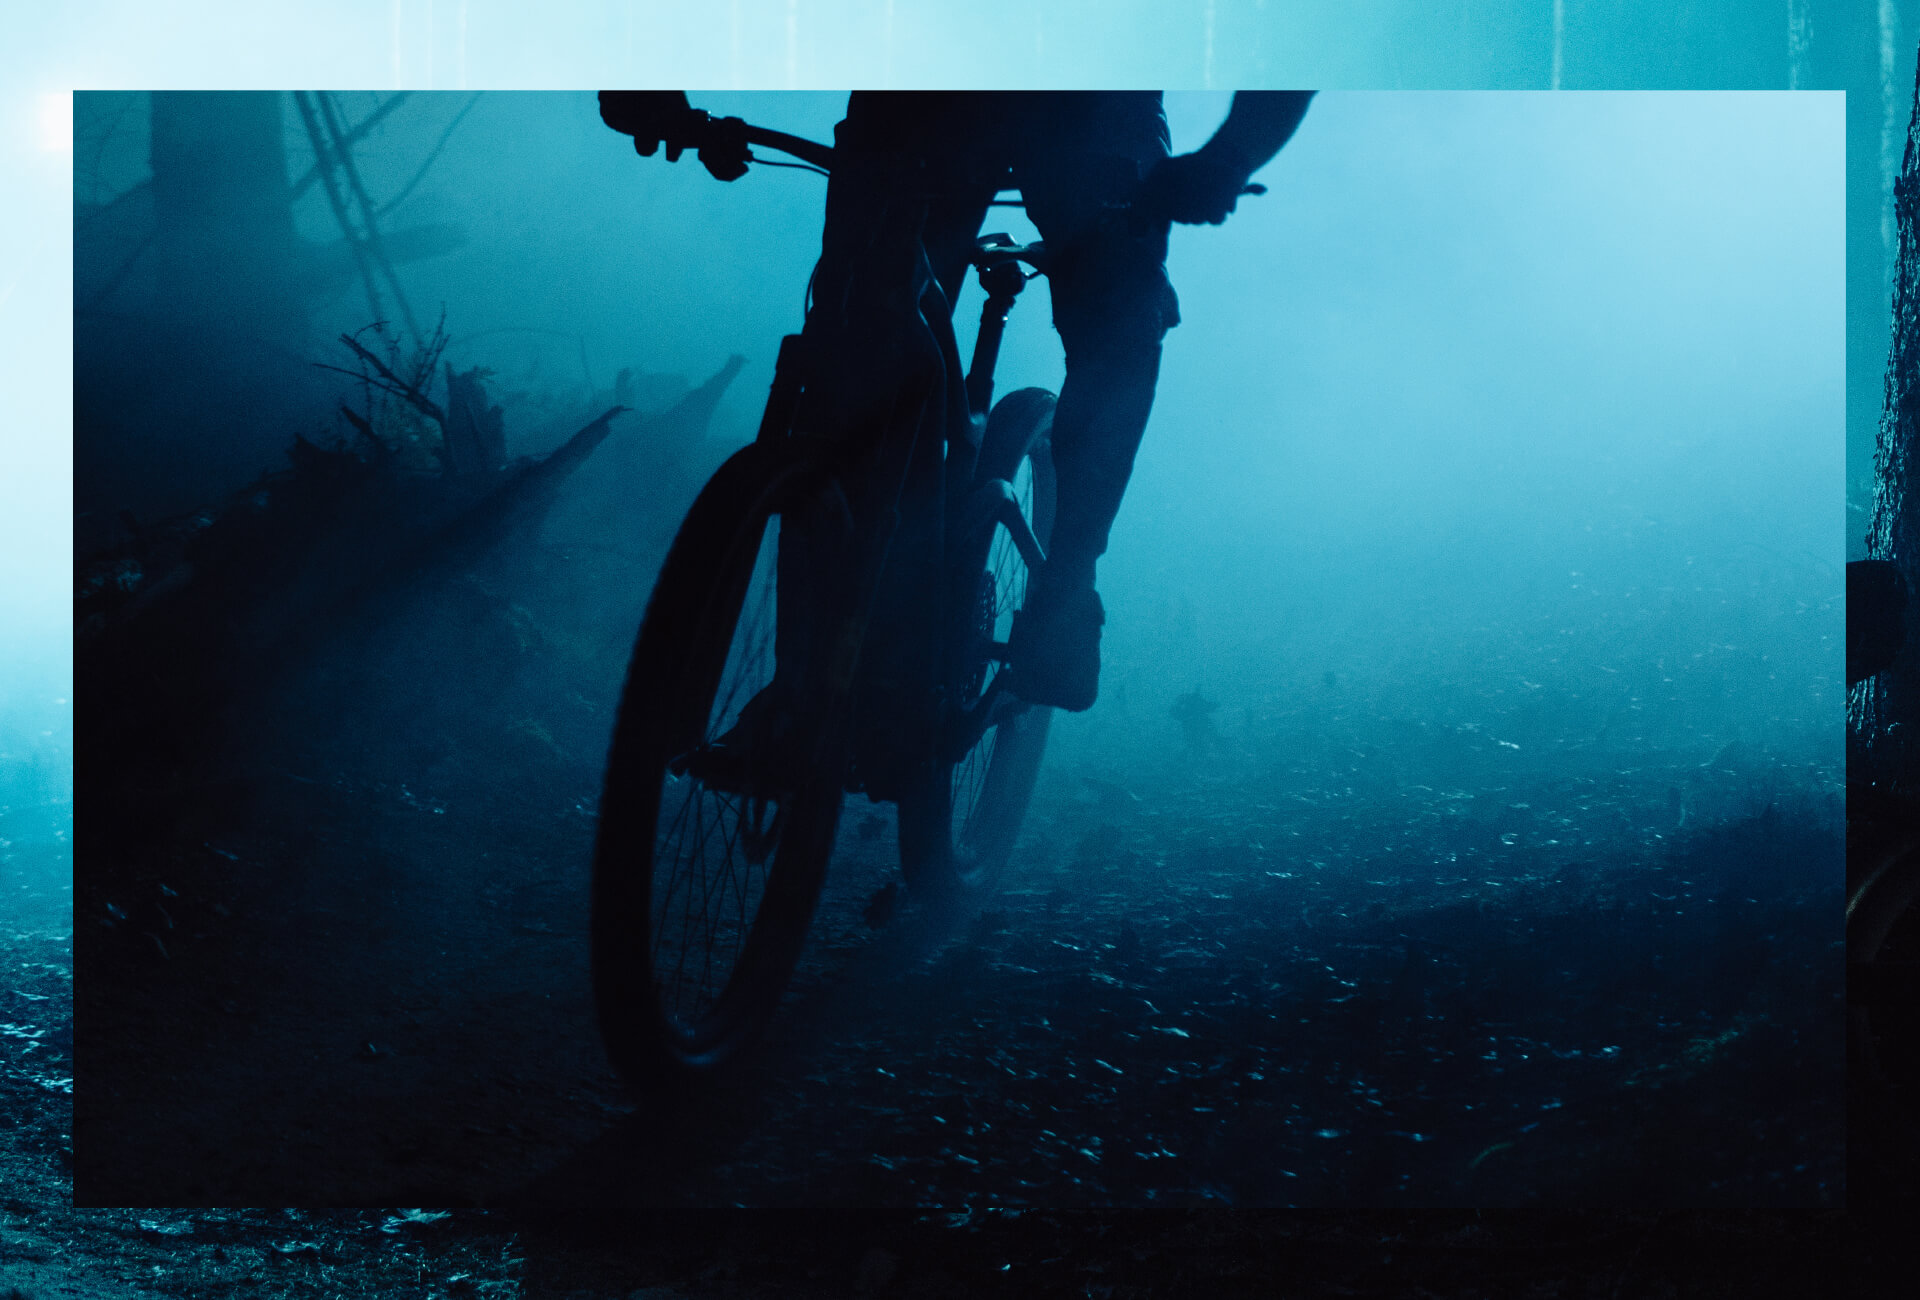 Someone riding a mountain bike through a dark forest with blue lights in the background